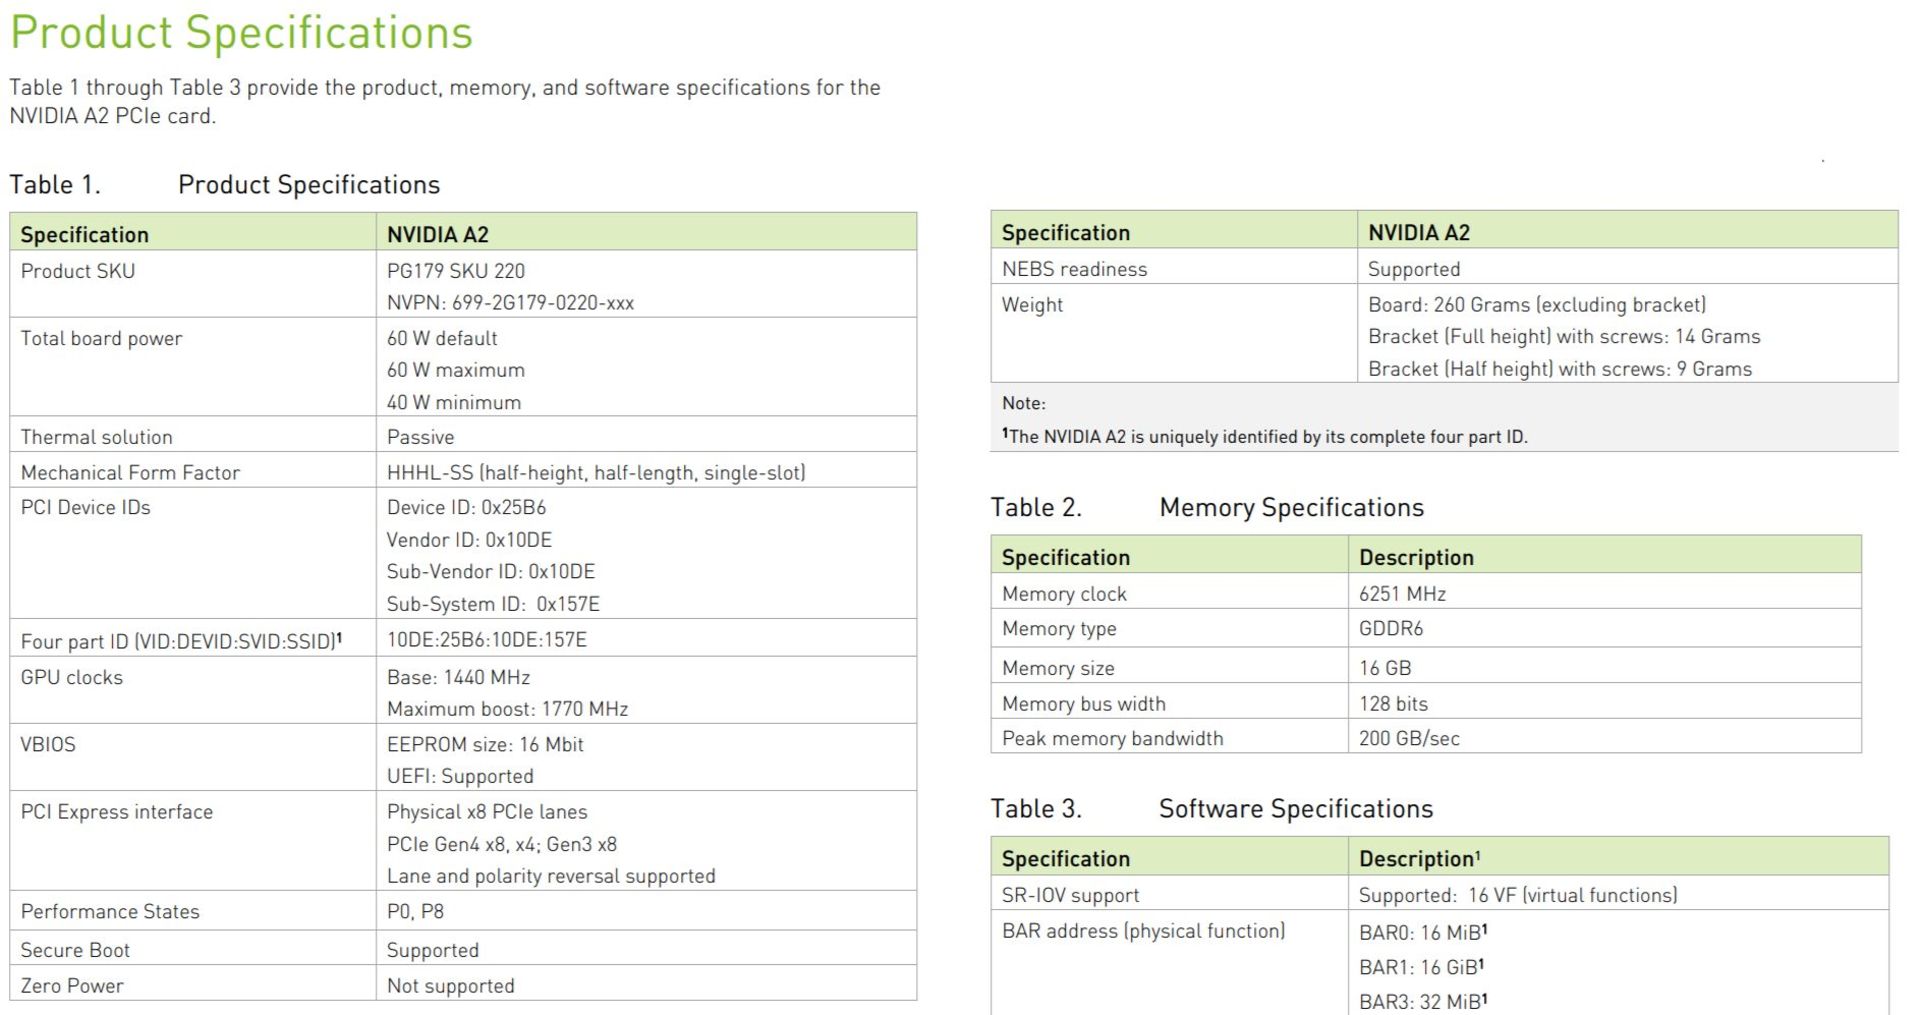 nvidia-a2-specifications